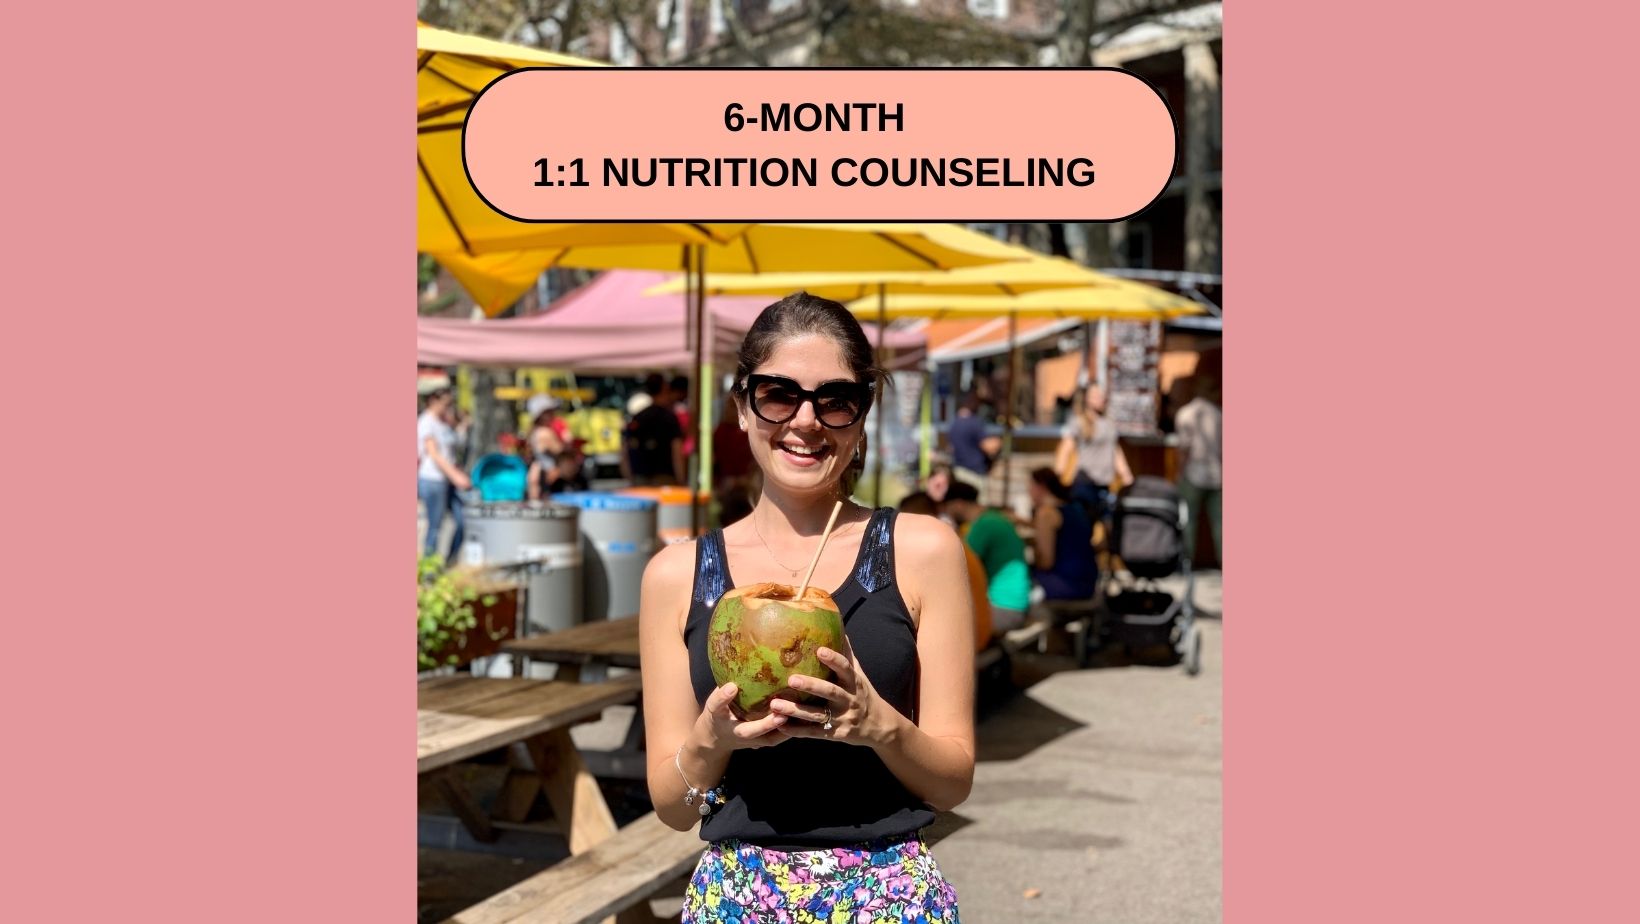 6-MONTH NUTRITION COUNSELING.jpg